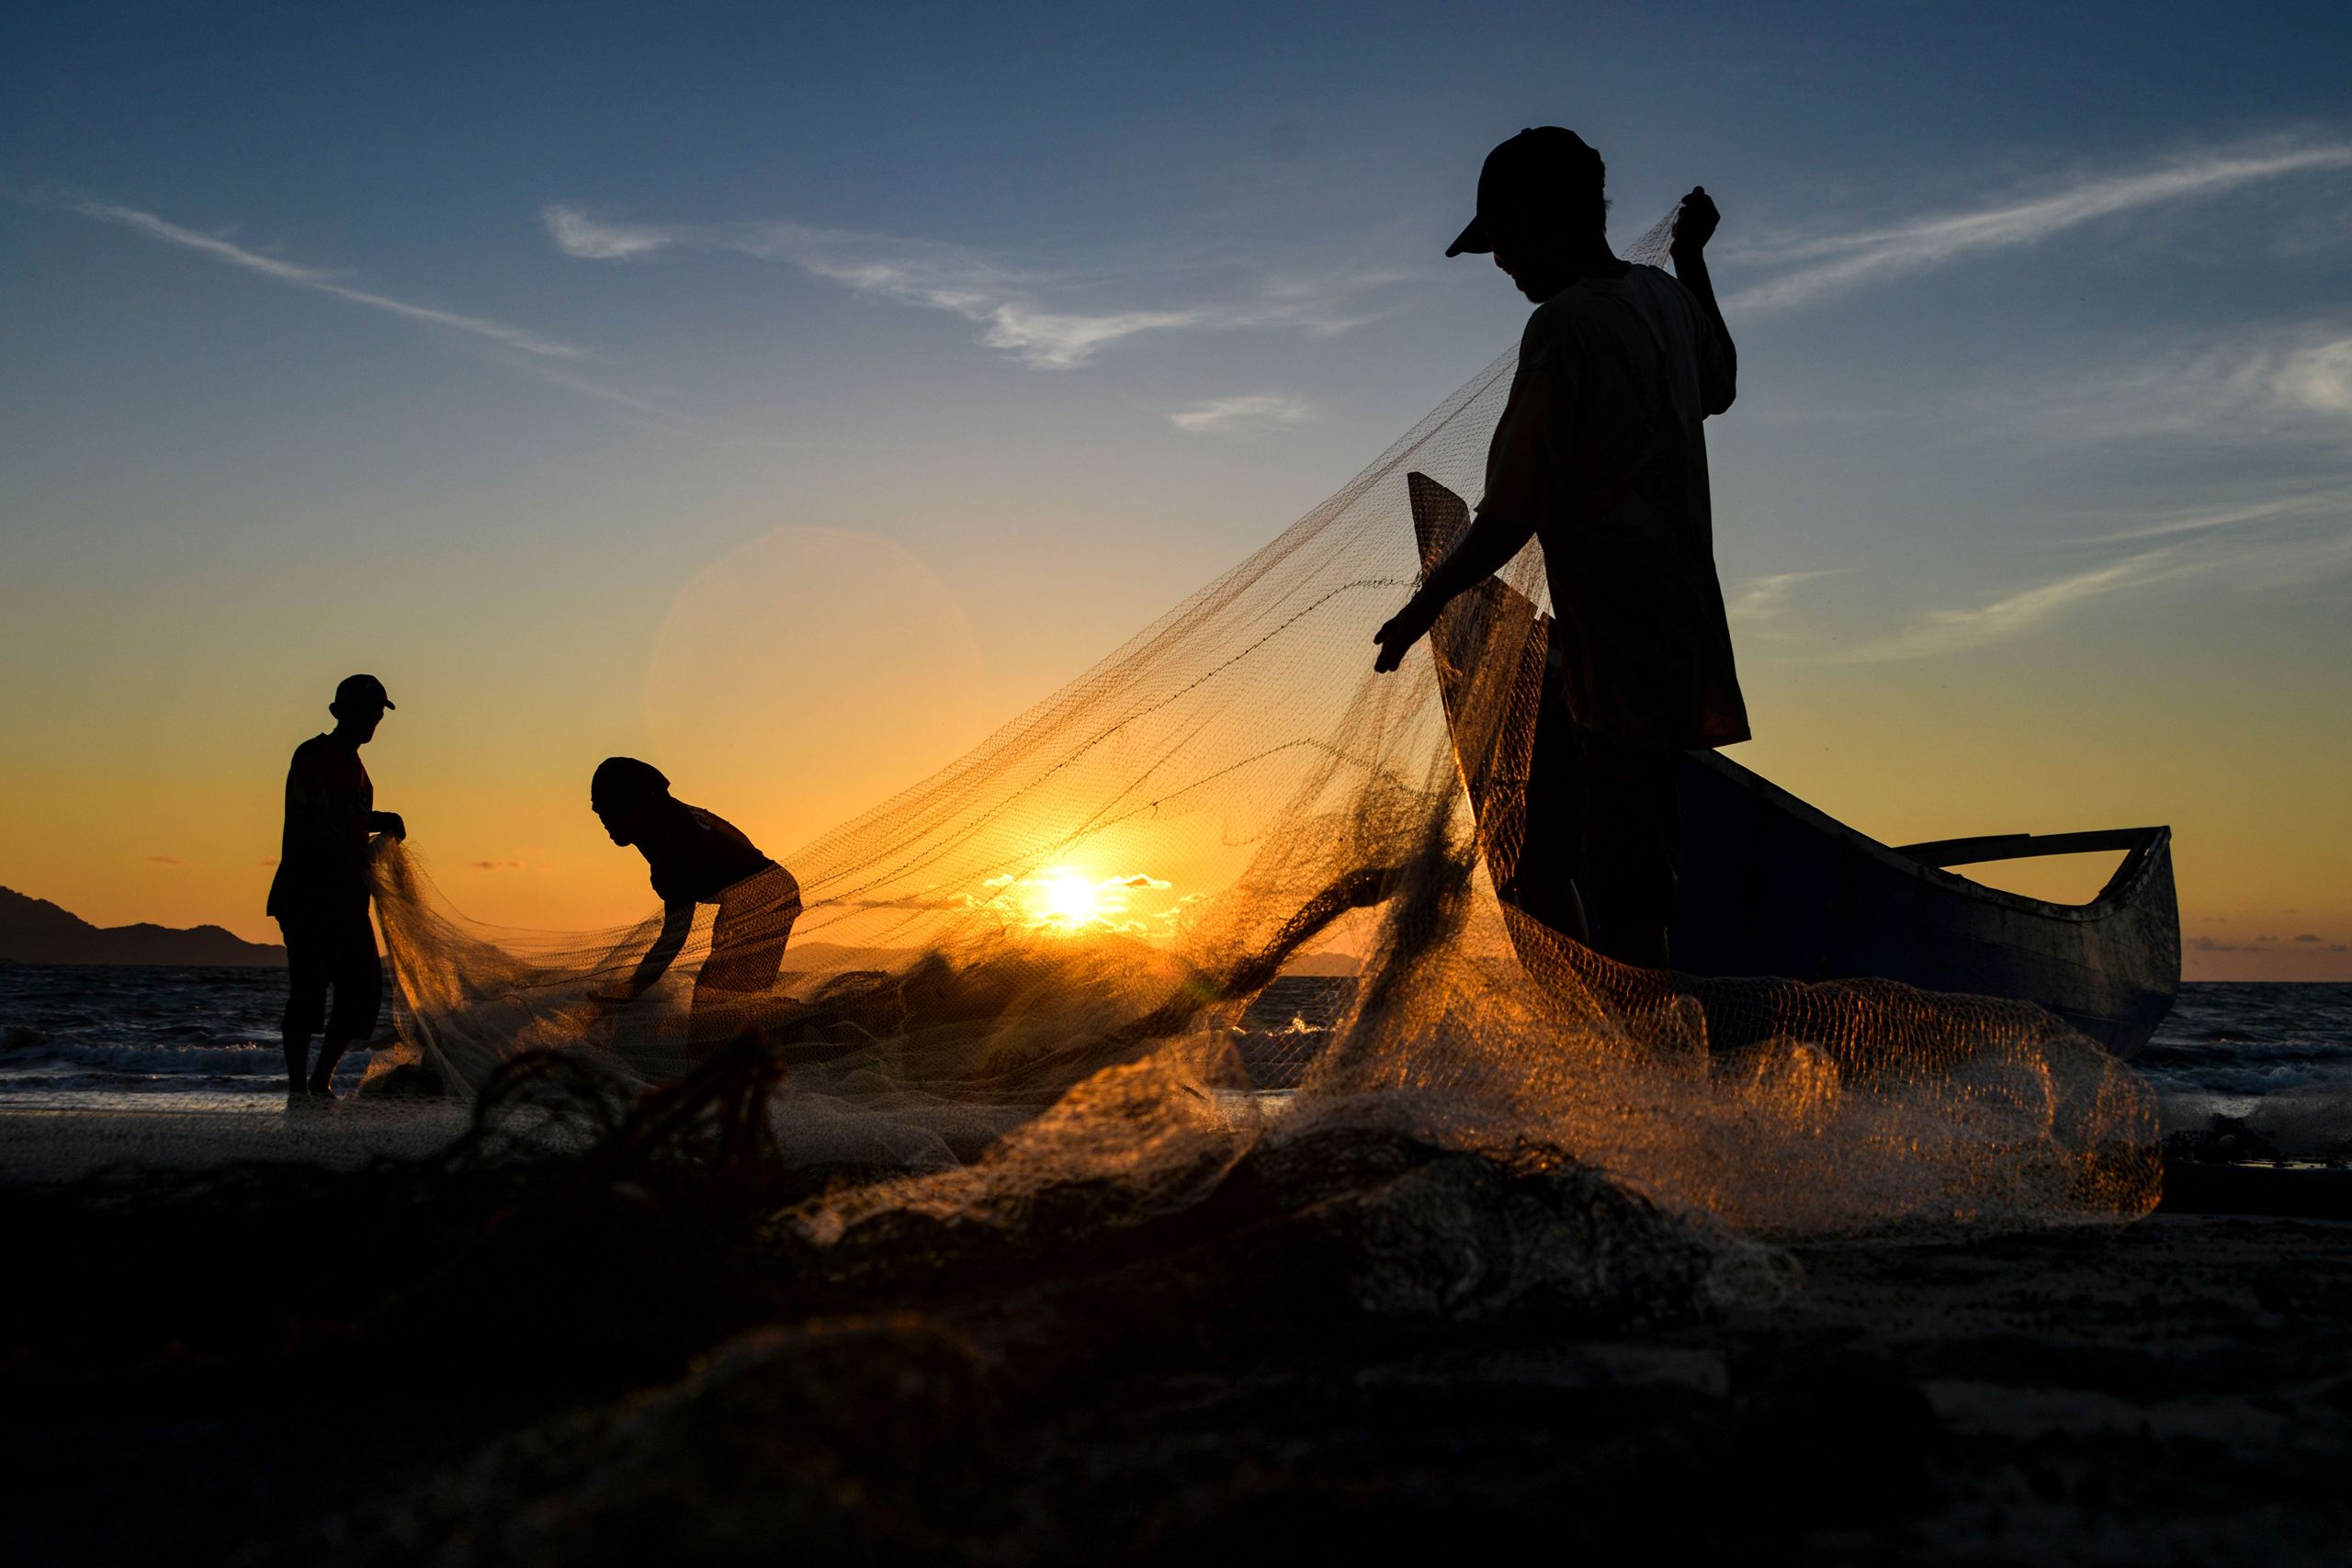 Silhouettes of fishermen cleaning their nets at sunset